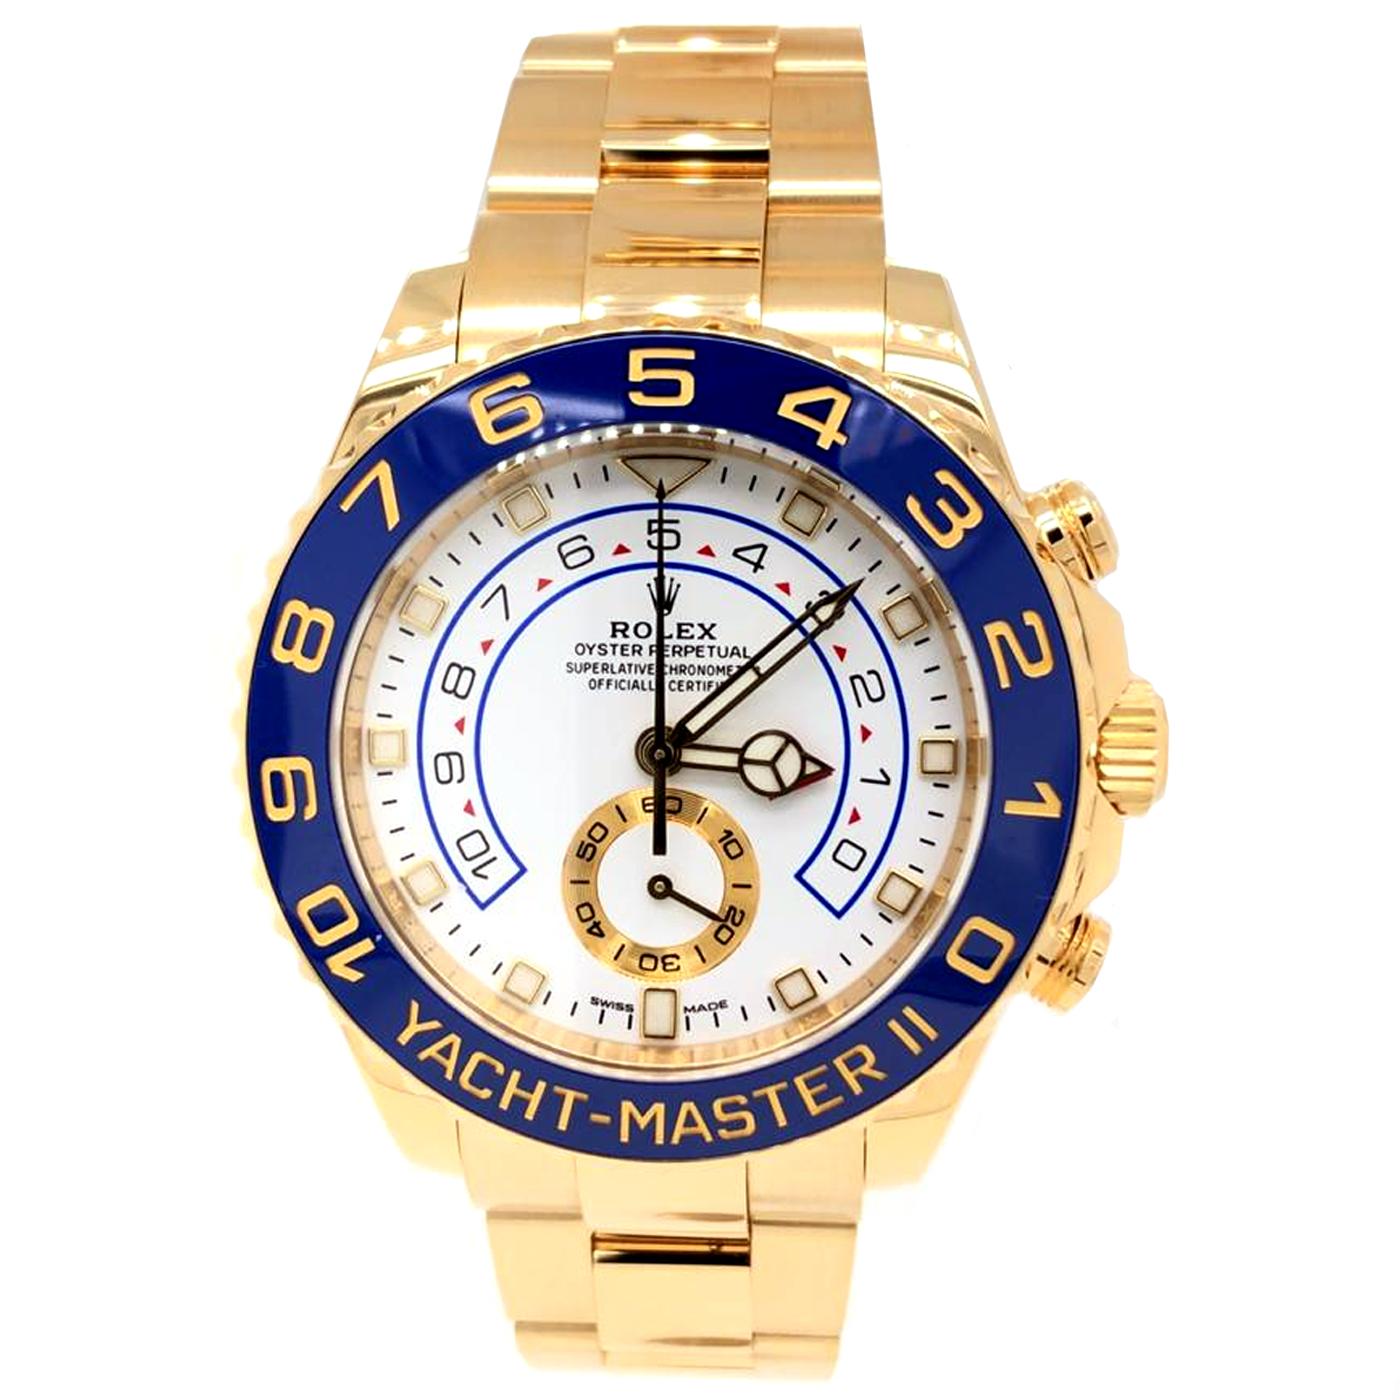 Take a nautical journey with the Rolex Yacht-Master II as your guide. This sea-inspired watch embraces the best features of yachting with a 90-degree bidirectional bezel in 18-Karat gold, This is a functional bezel that works as a programmable